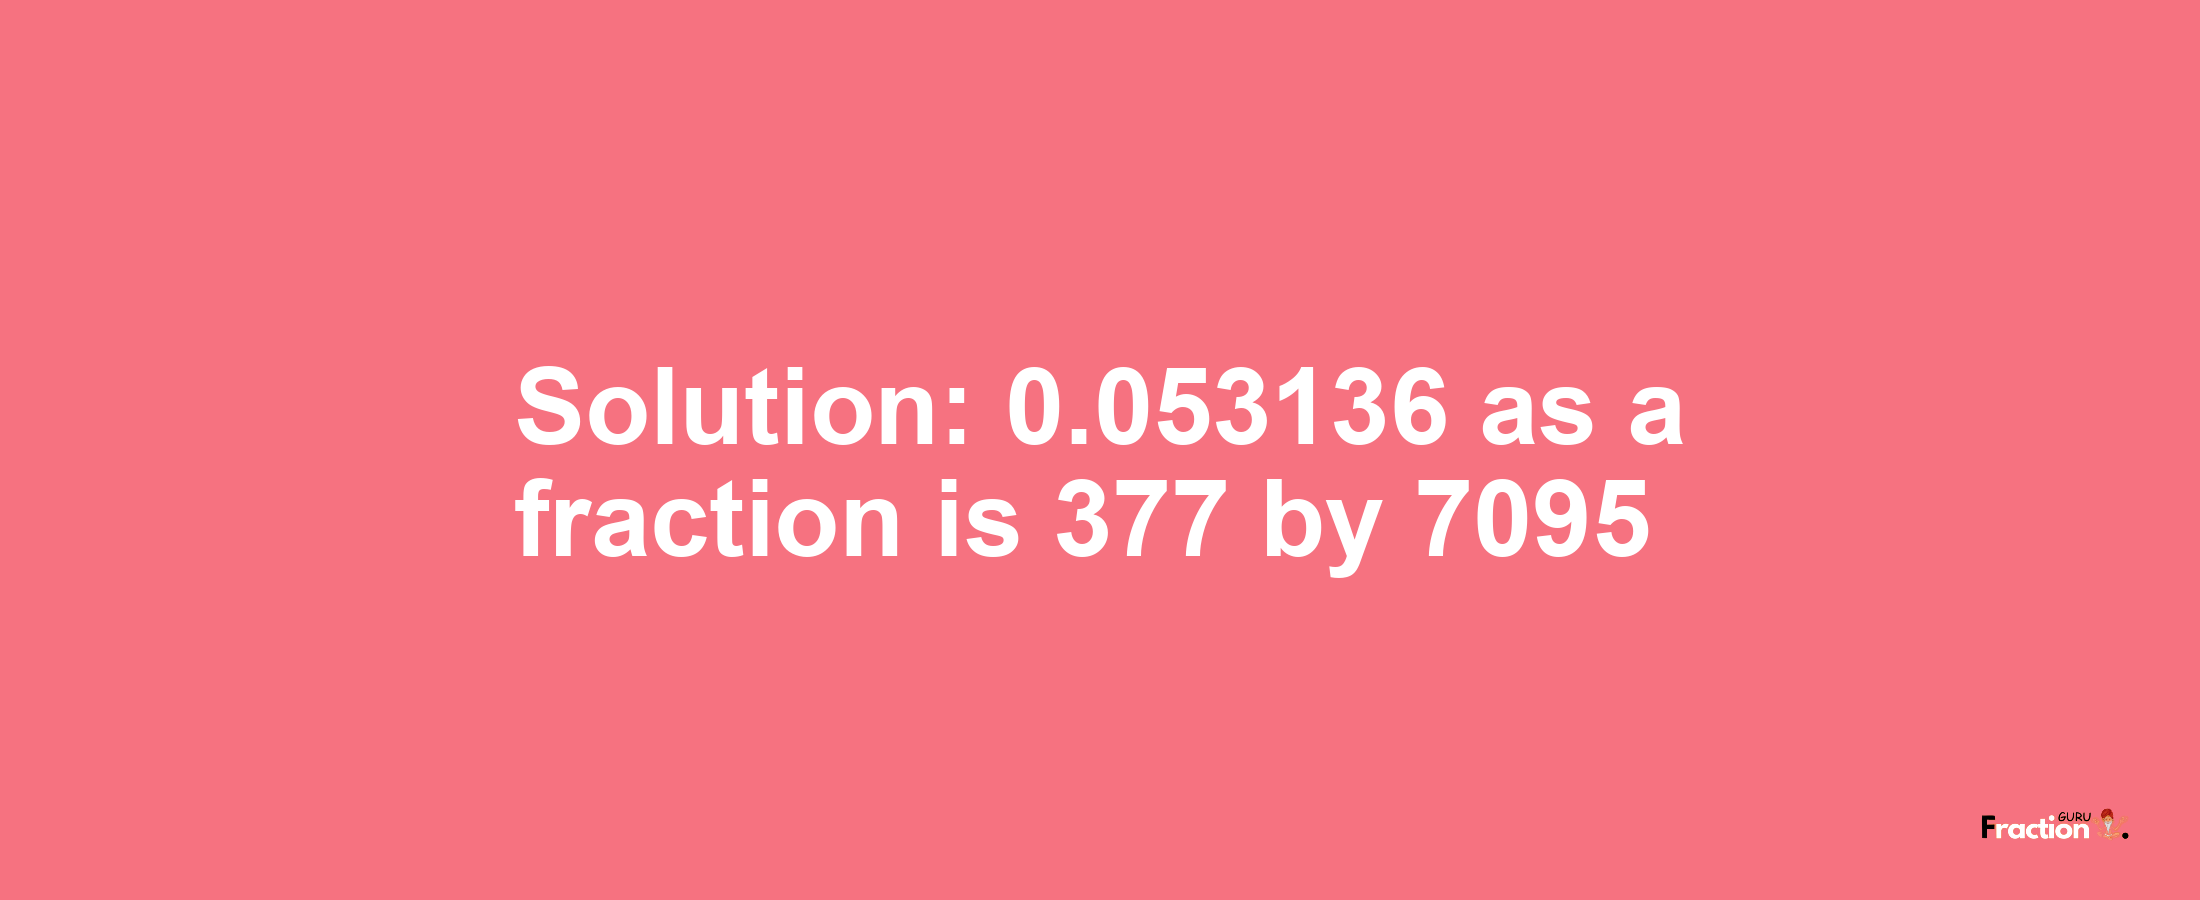 Solution:0.053136 as a fraction is 377/7095